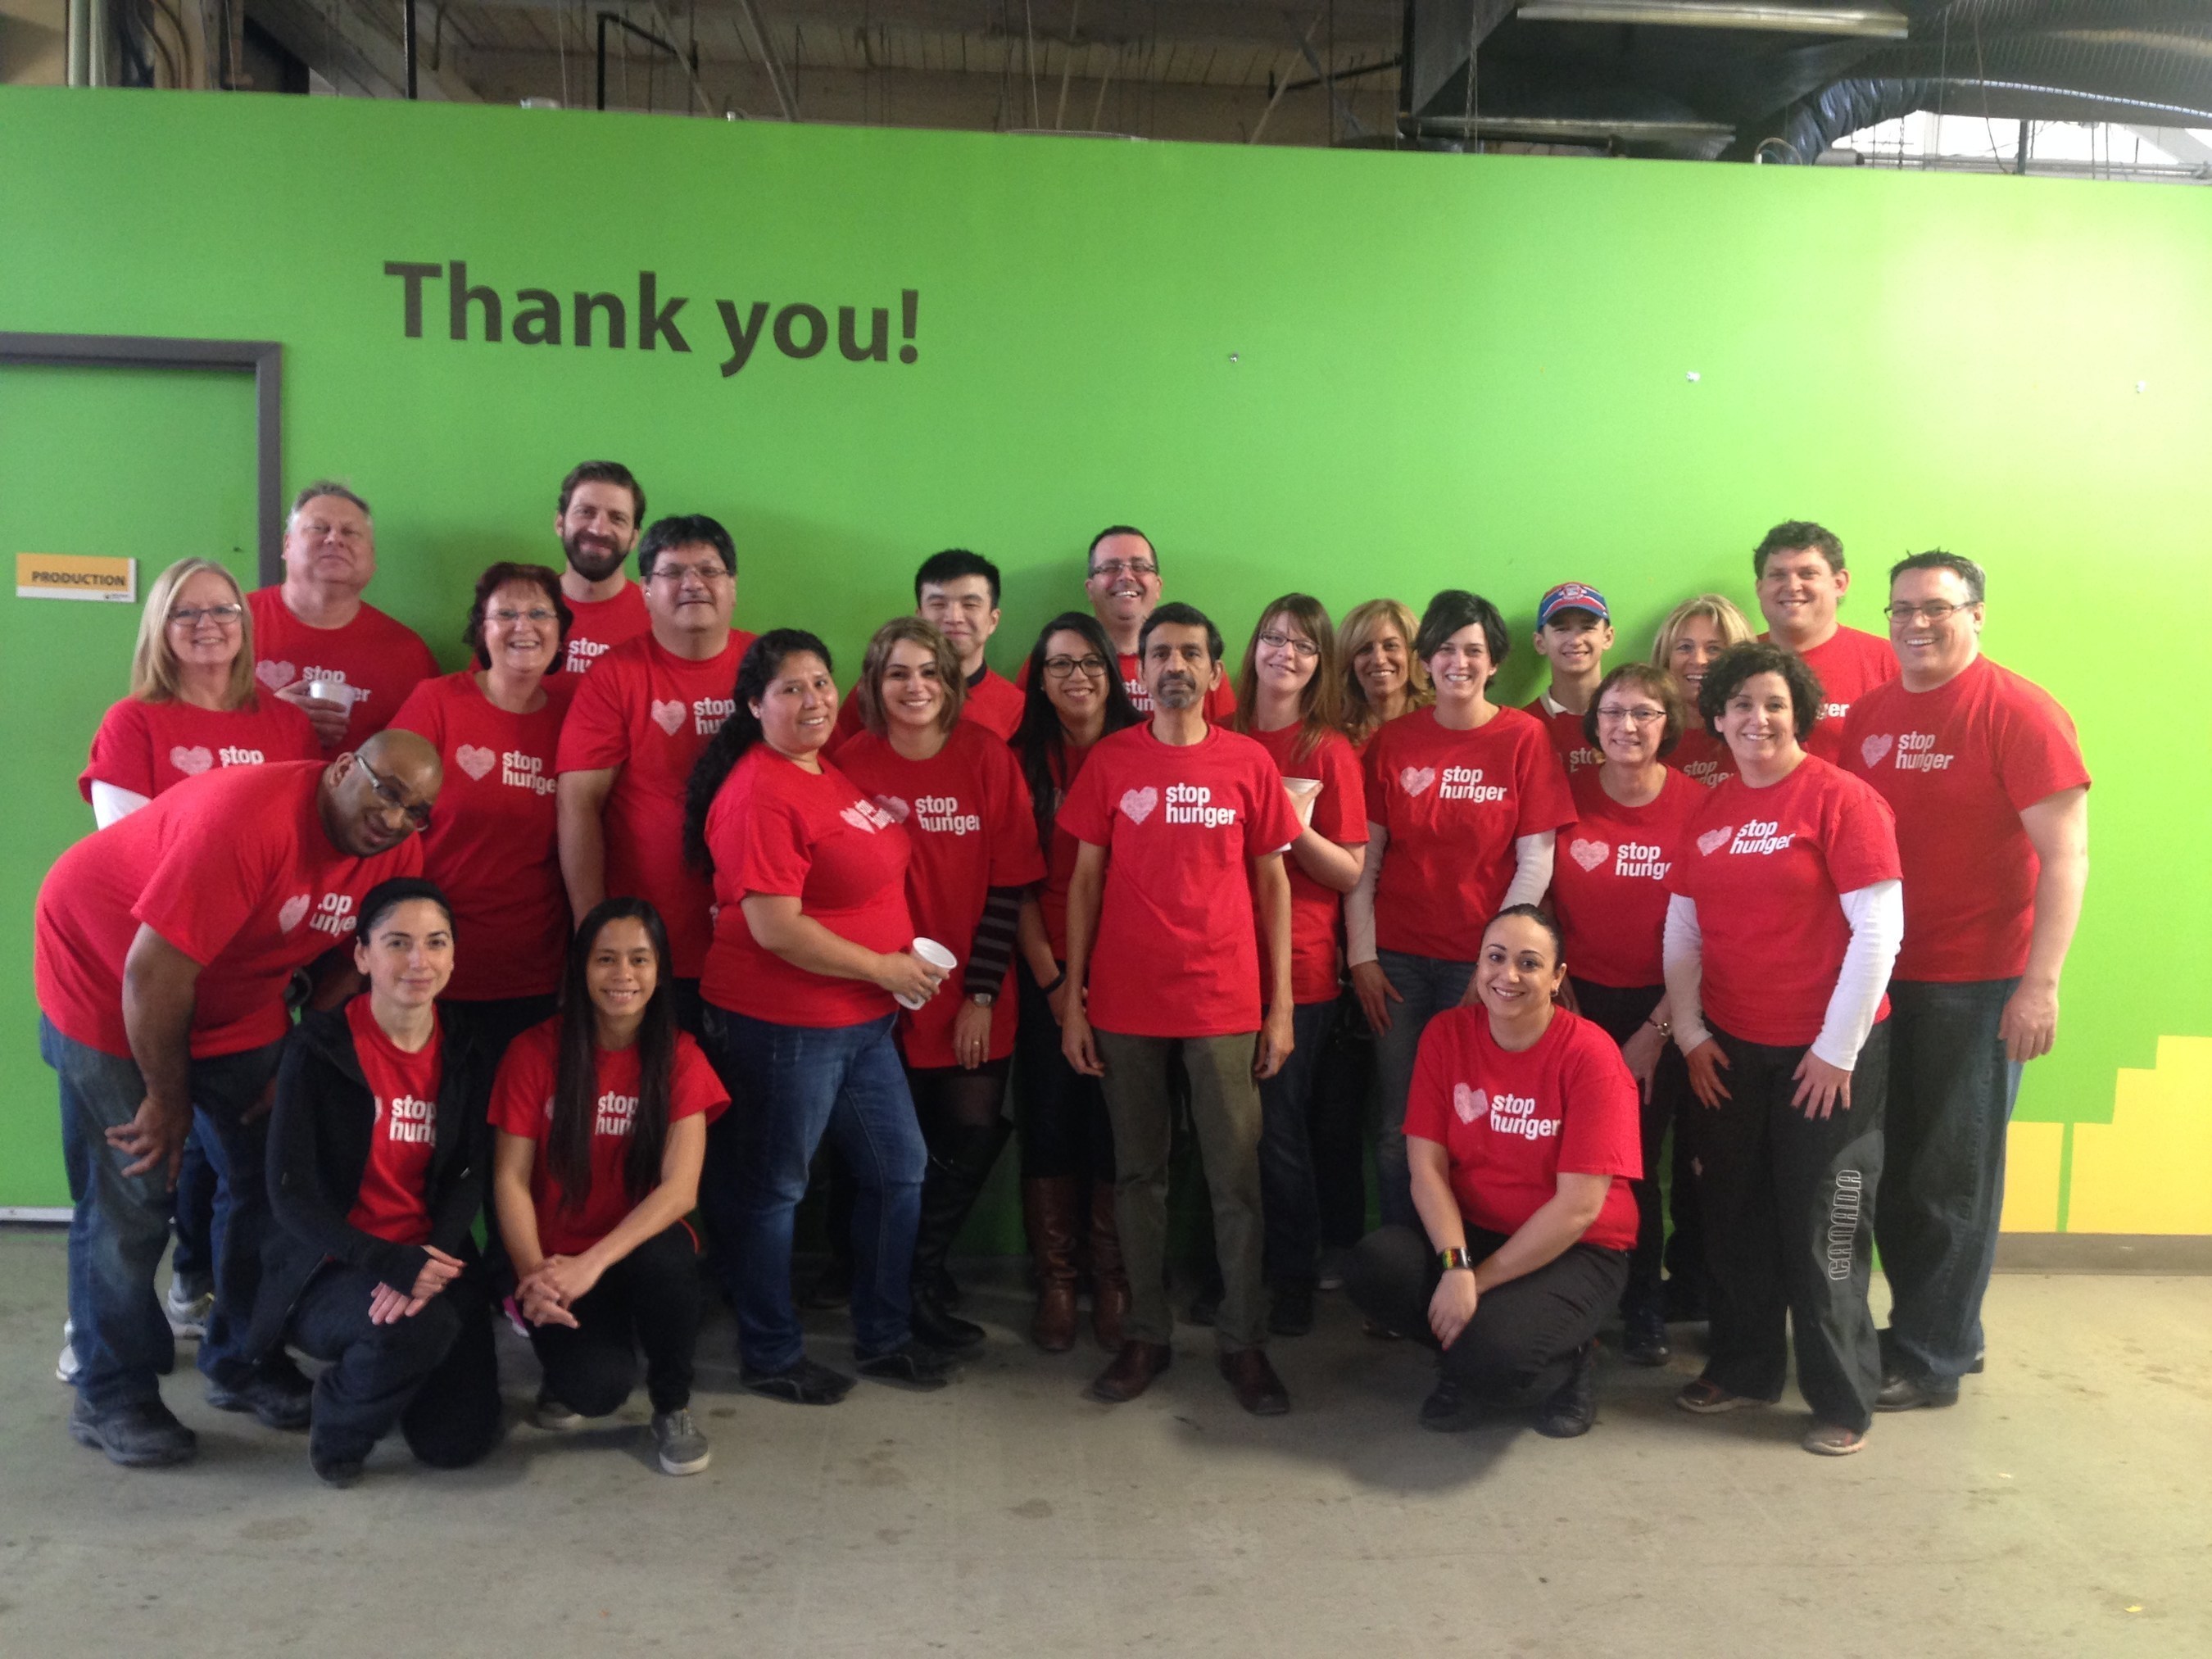 Sodexo team in Toronto celebrates Stop Hunger Servathon, an annual volunteer effort throughout April that encourages Sodexo's 420,000 employees worldwide to fight hunger in local communities. 2016 marks the 20th anniversary of Sodexo's commitment to Stop Hunger.